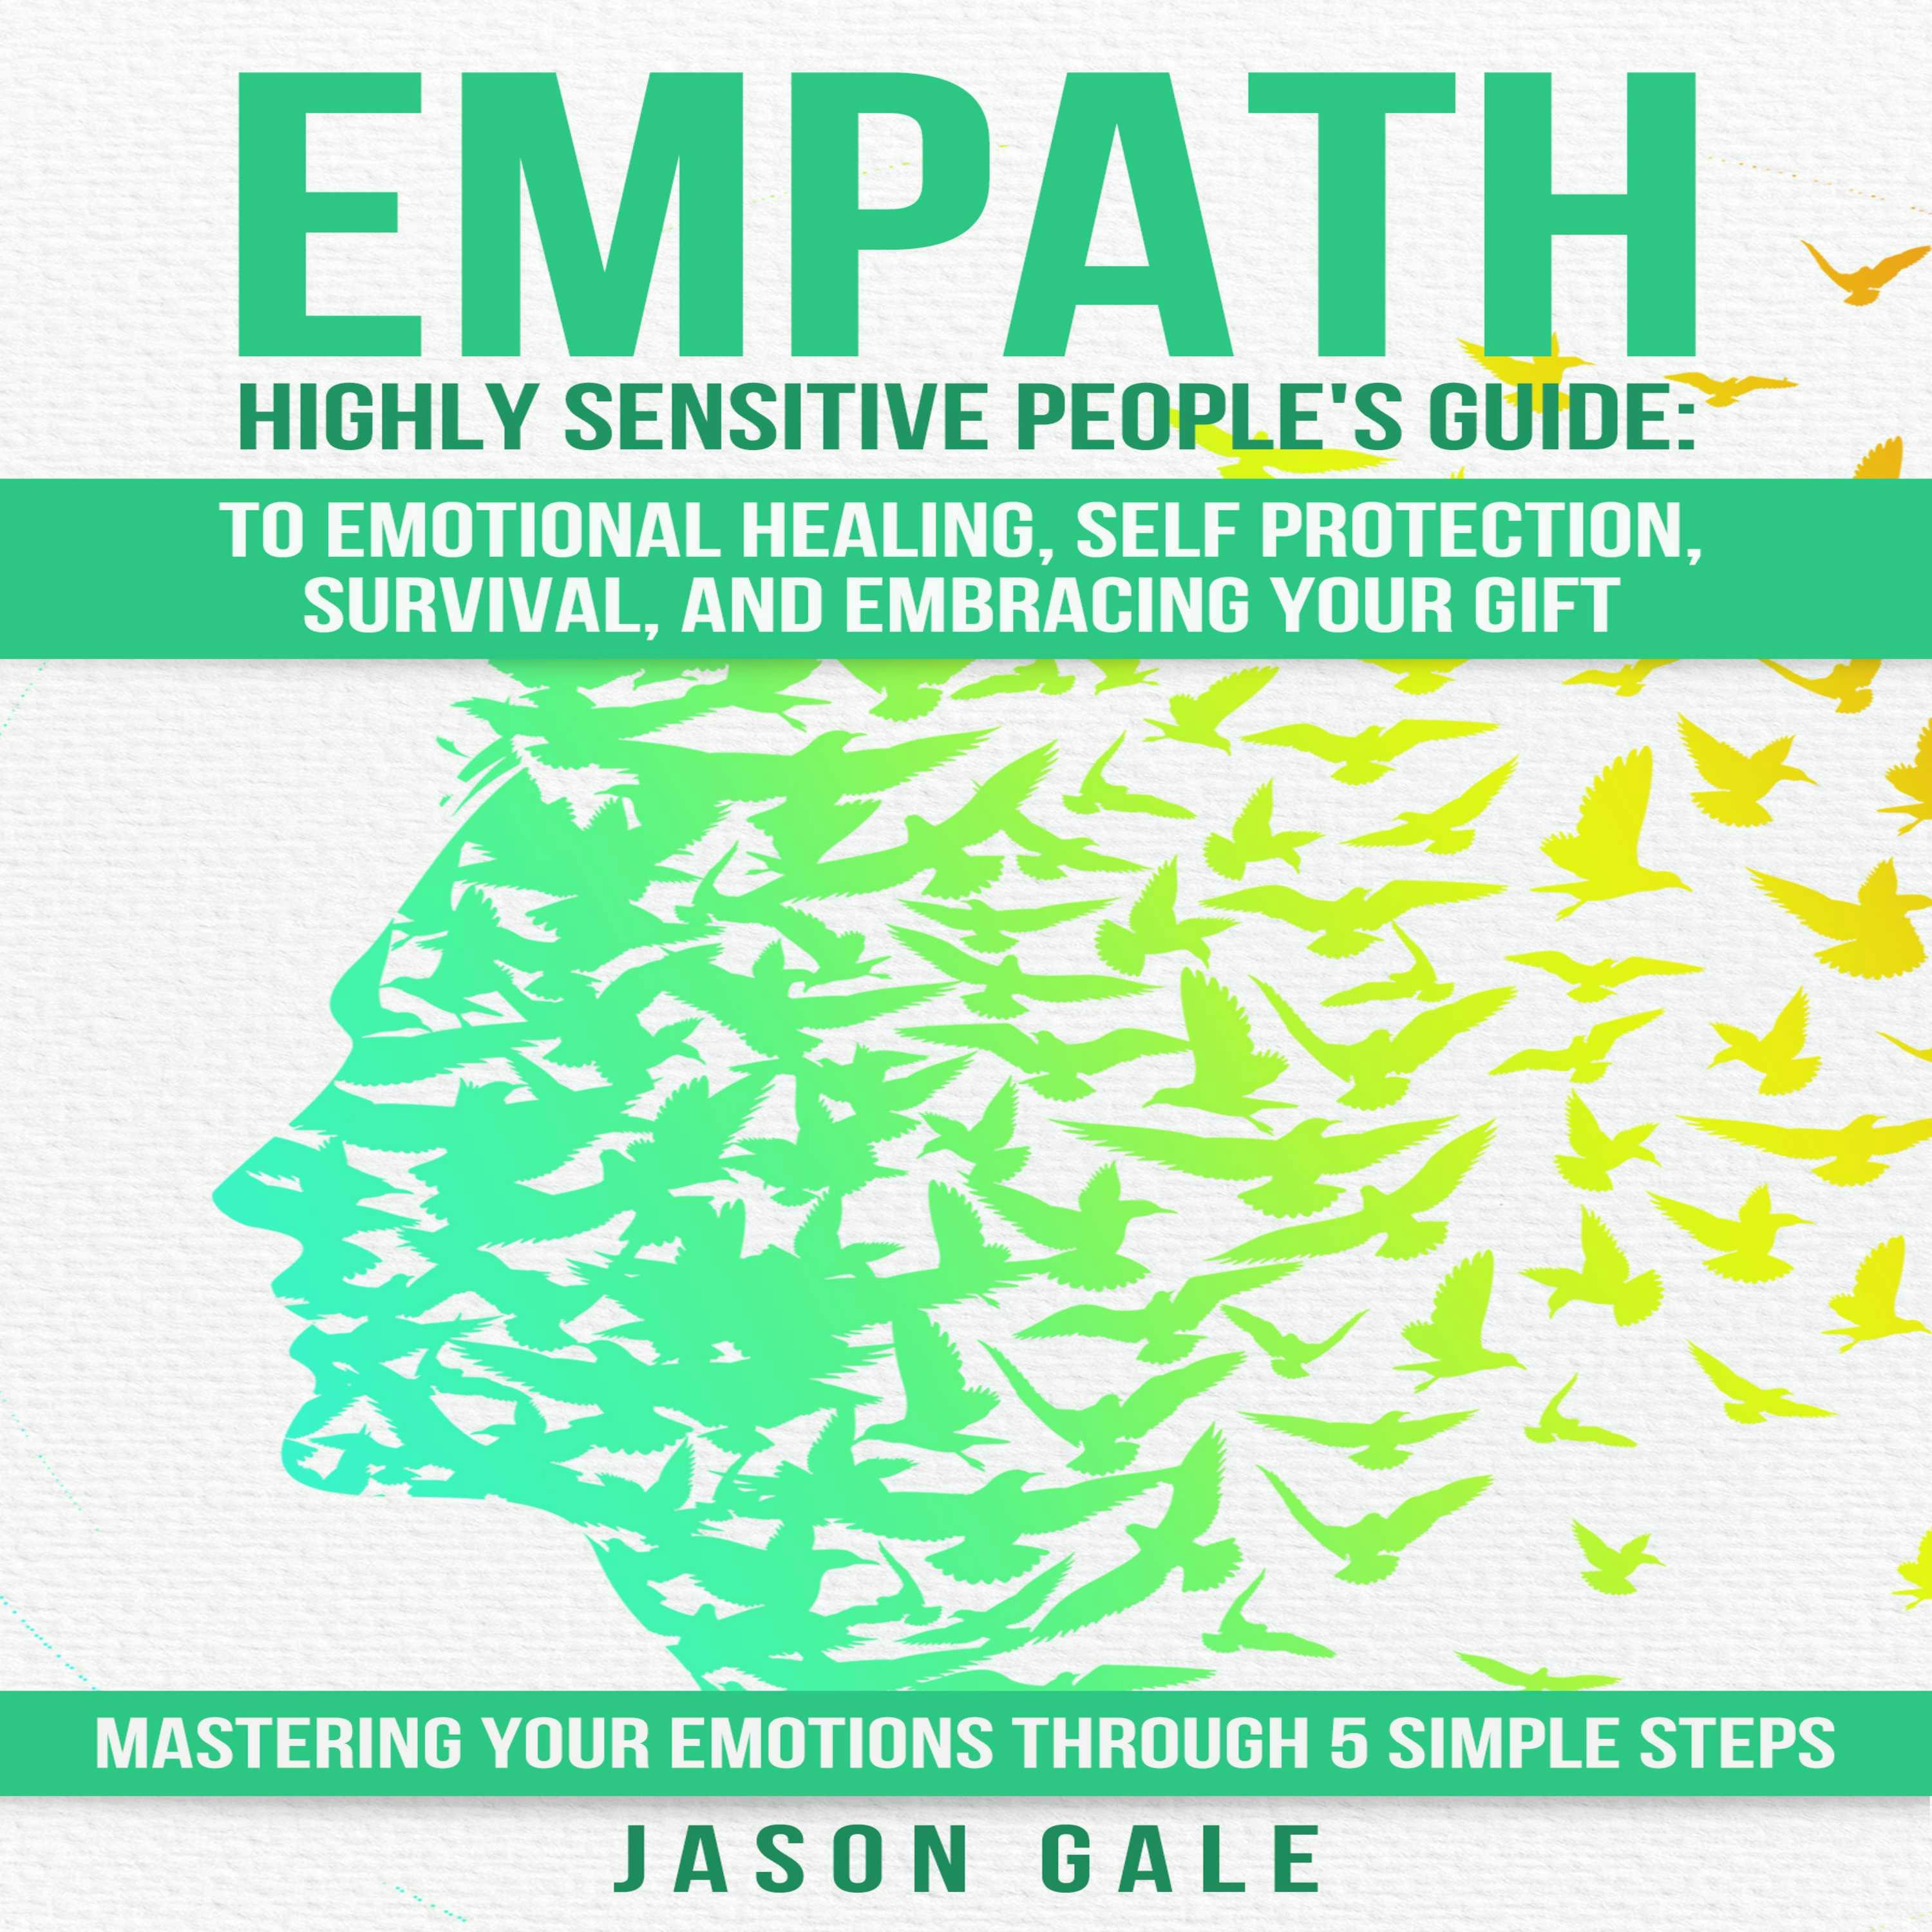 Empath Highly Sensitive People's Guide: To Emotional Healing, Self Protection, Survival, And Embracing Your Gift: Mastering Your Emotions Through 5 Simple Steps - Jason Gale